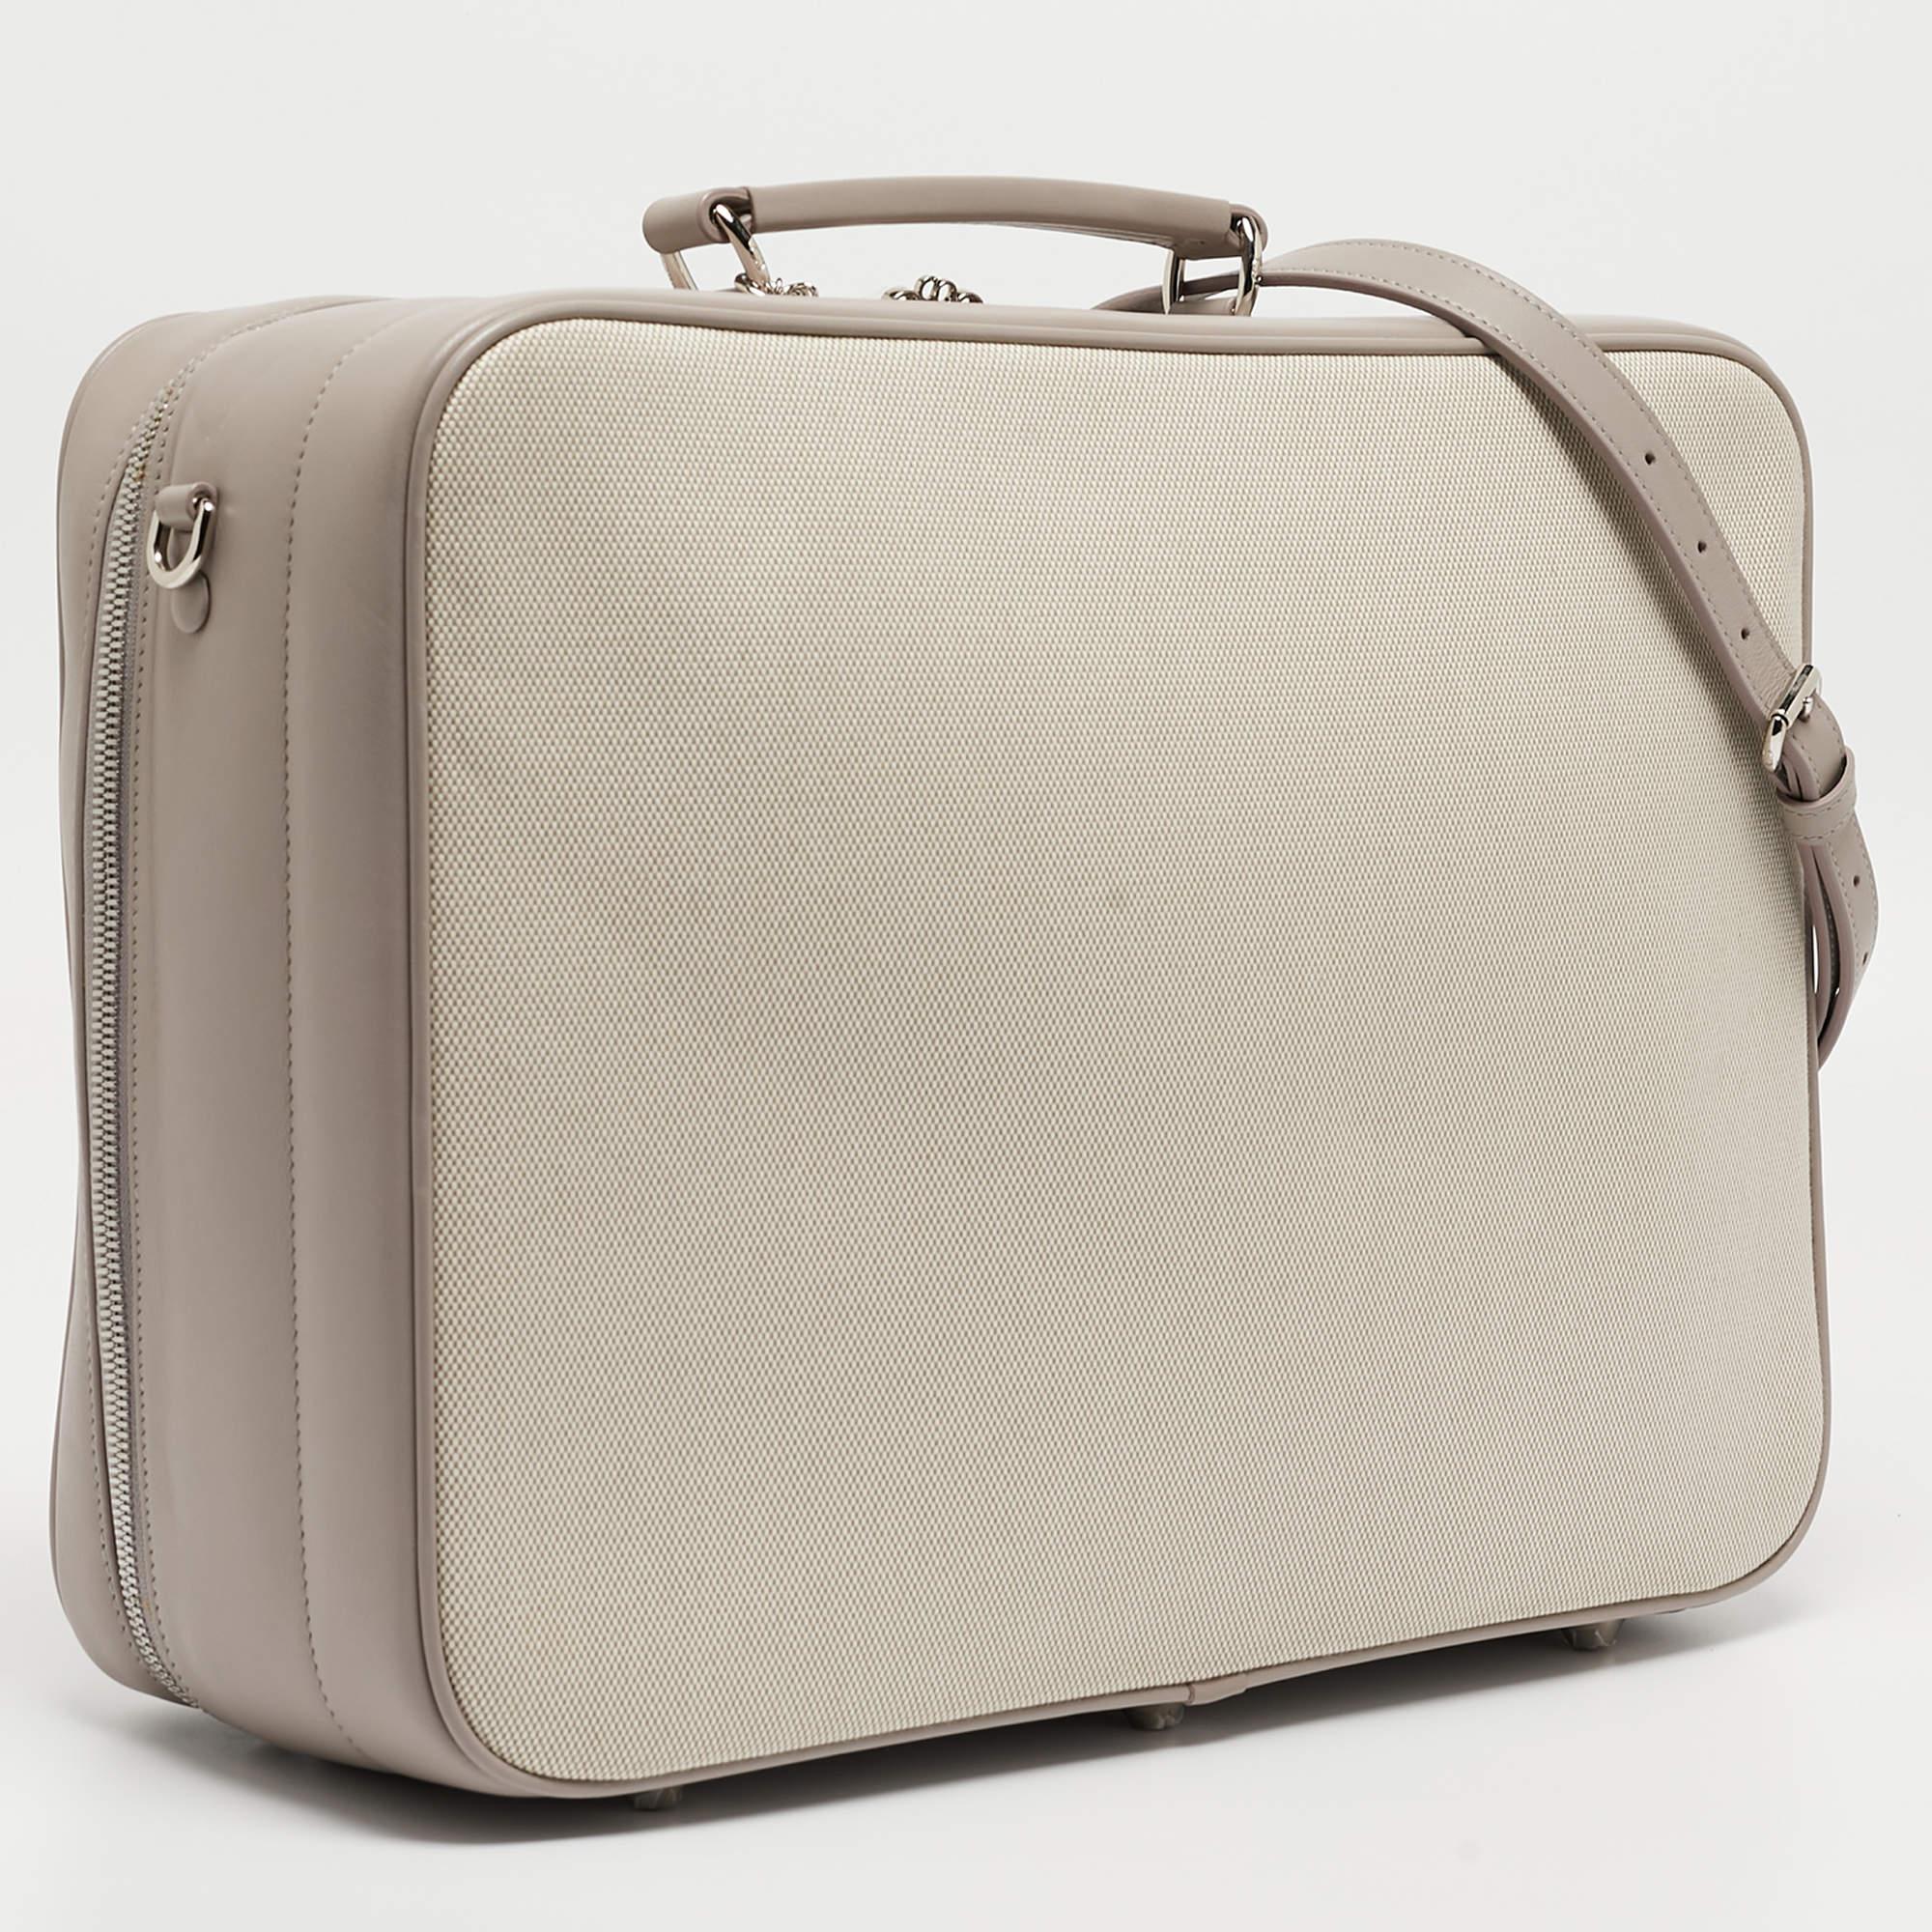 The Dior nappy suitcase exudes elegance with its sophisticated fusion of beige canvas and lilac leather accents. The spacious interior is designed for efficient organization, while the iconic Dior logo adds a touch of luxury. It's a stylish and